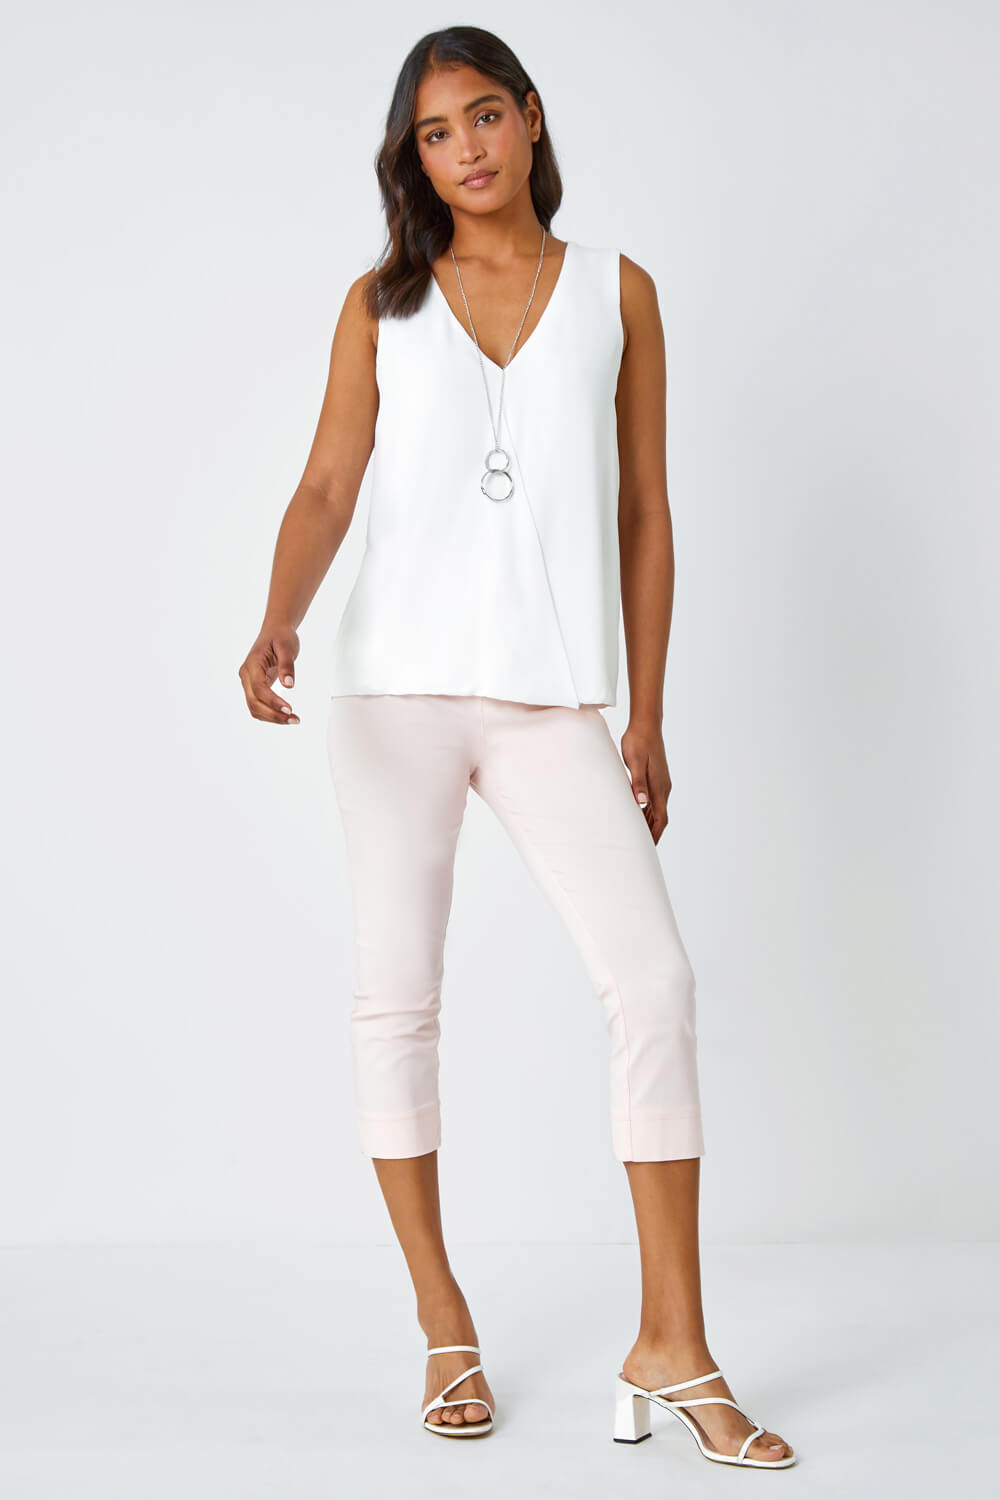 Ivory  Sleeveless Vest Top with Necklace, Image 4 of 5